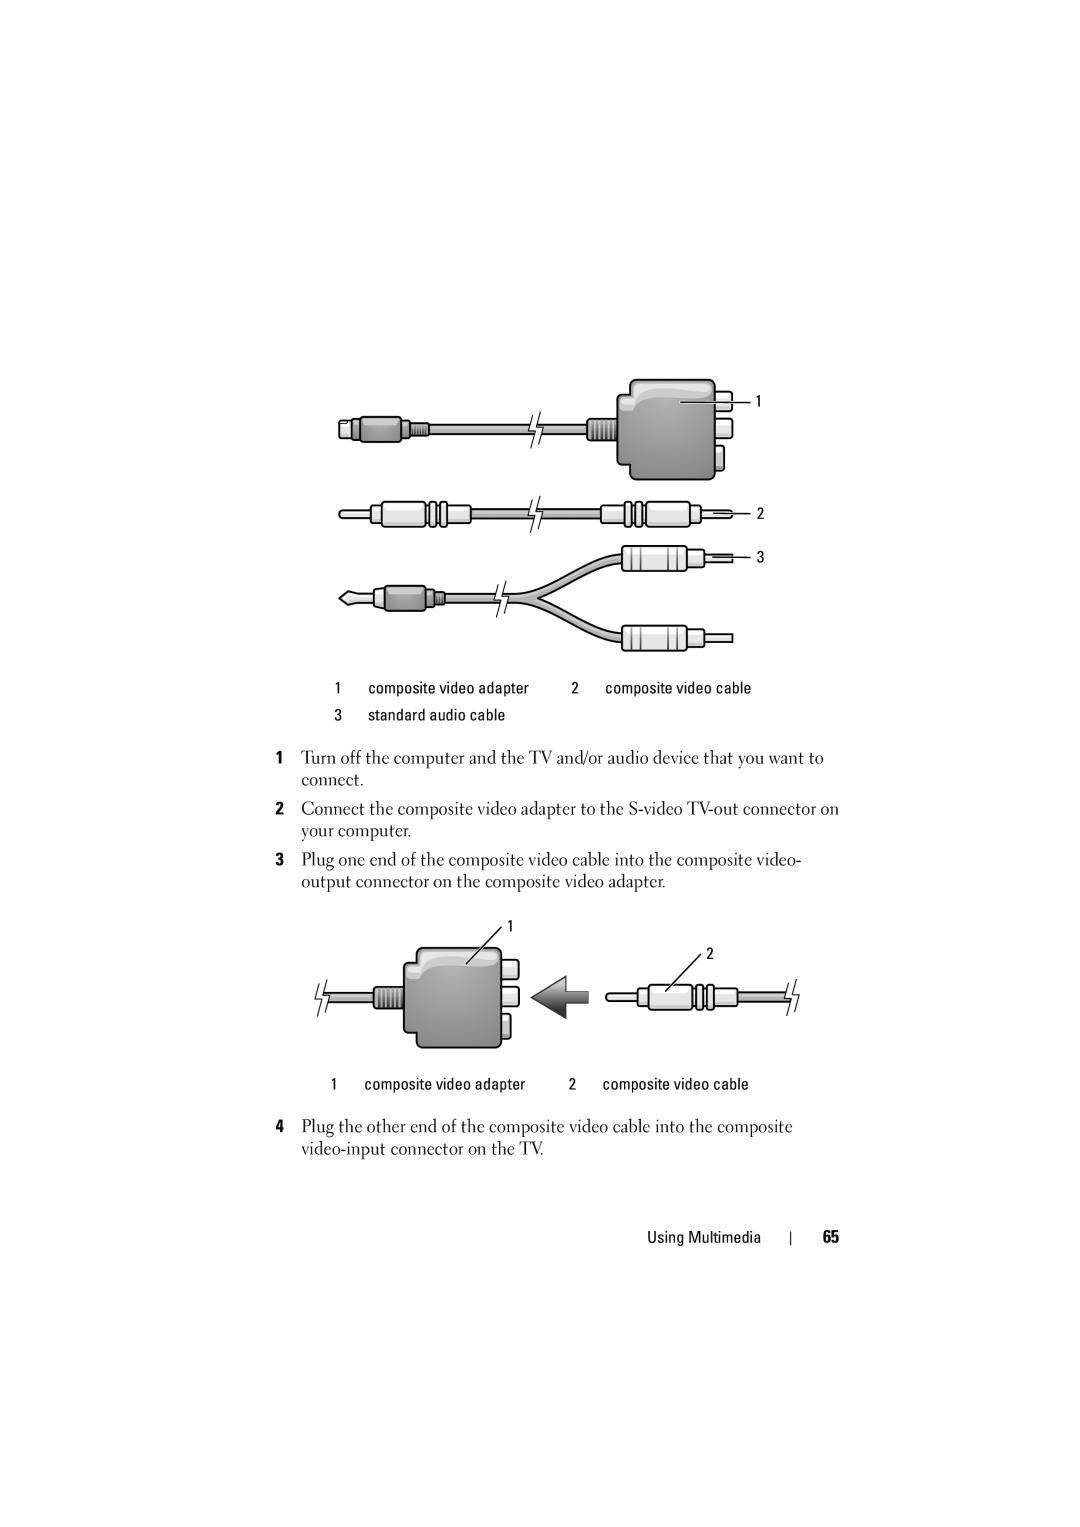 Dell 1526, 1525 owner manual standard audio cable, composite video adapter, Using Multimedia, composite video cable 